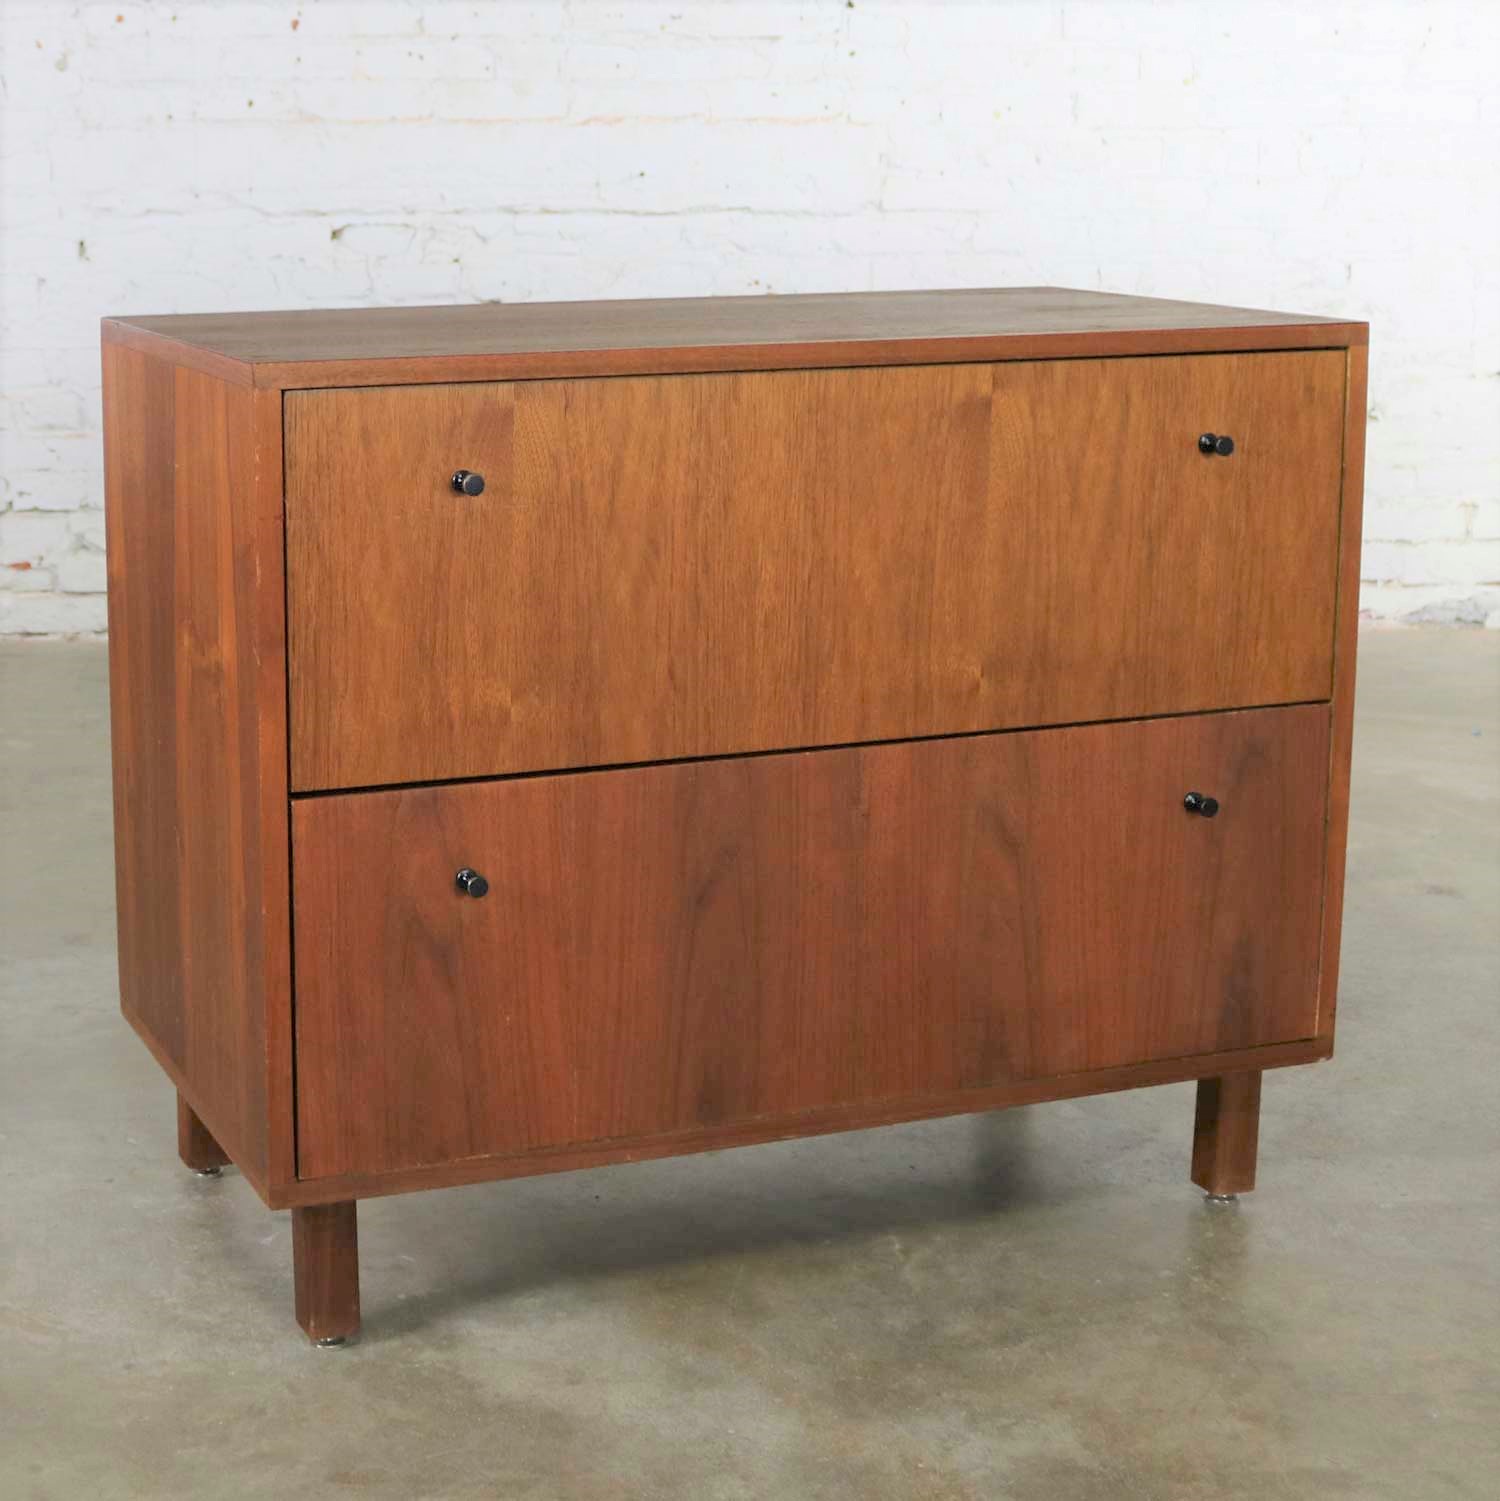 Mid Century Modern Two Drawer Lateral File Cabinet in Walnut by Hardwood House Inc.